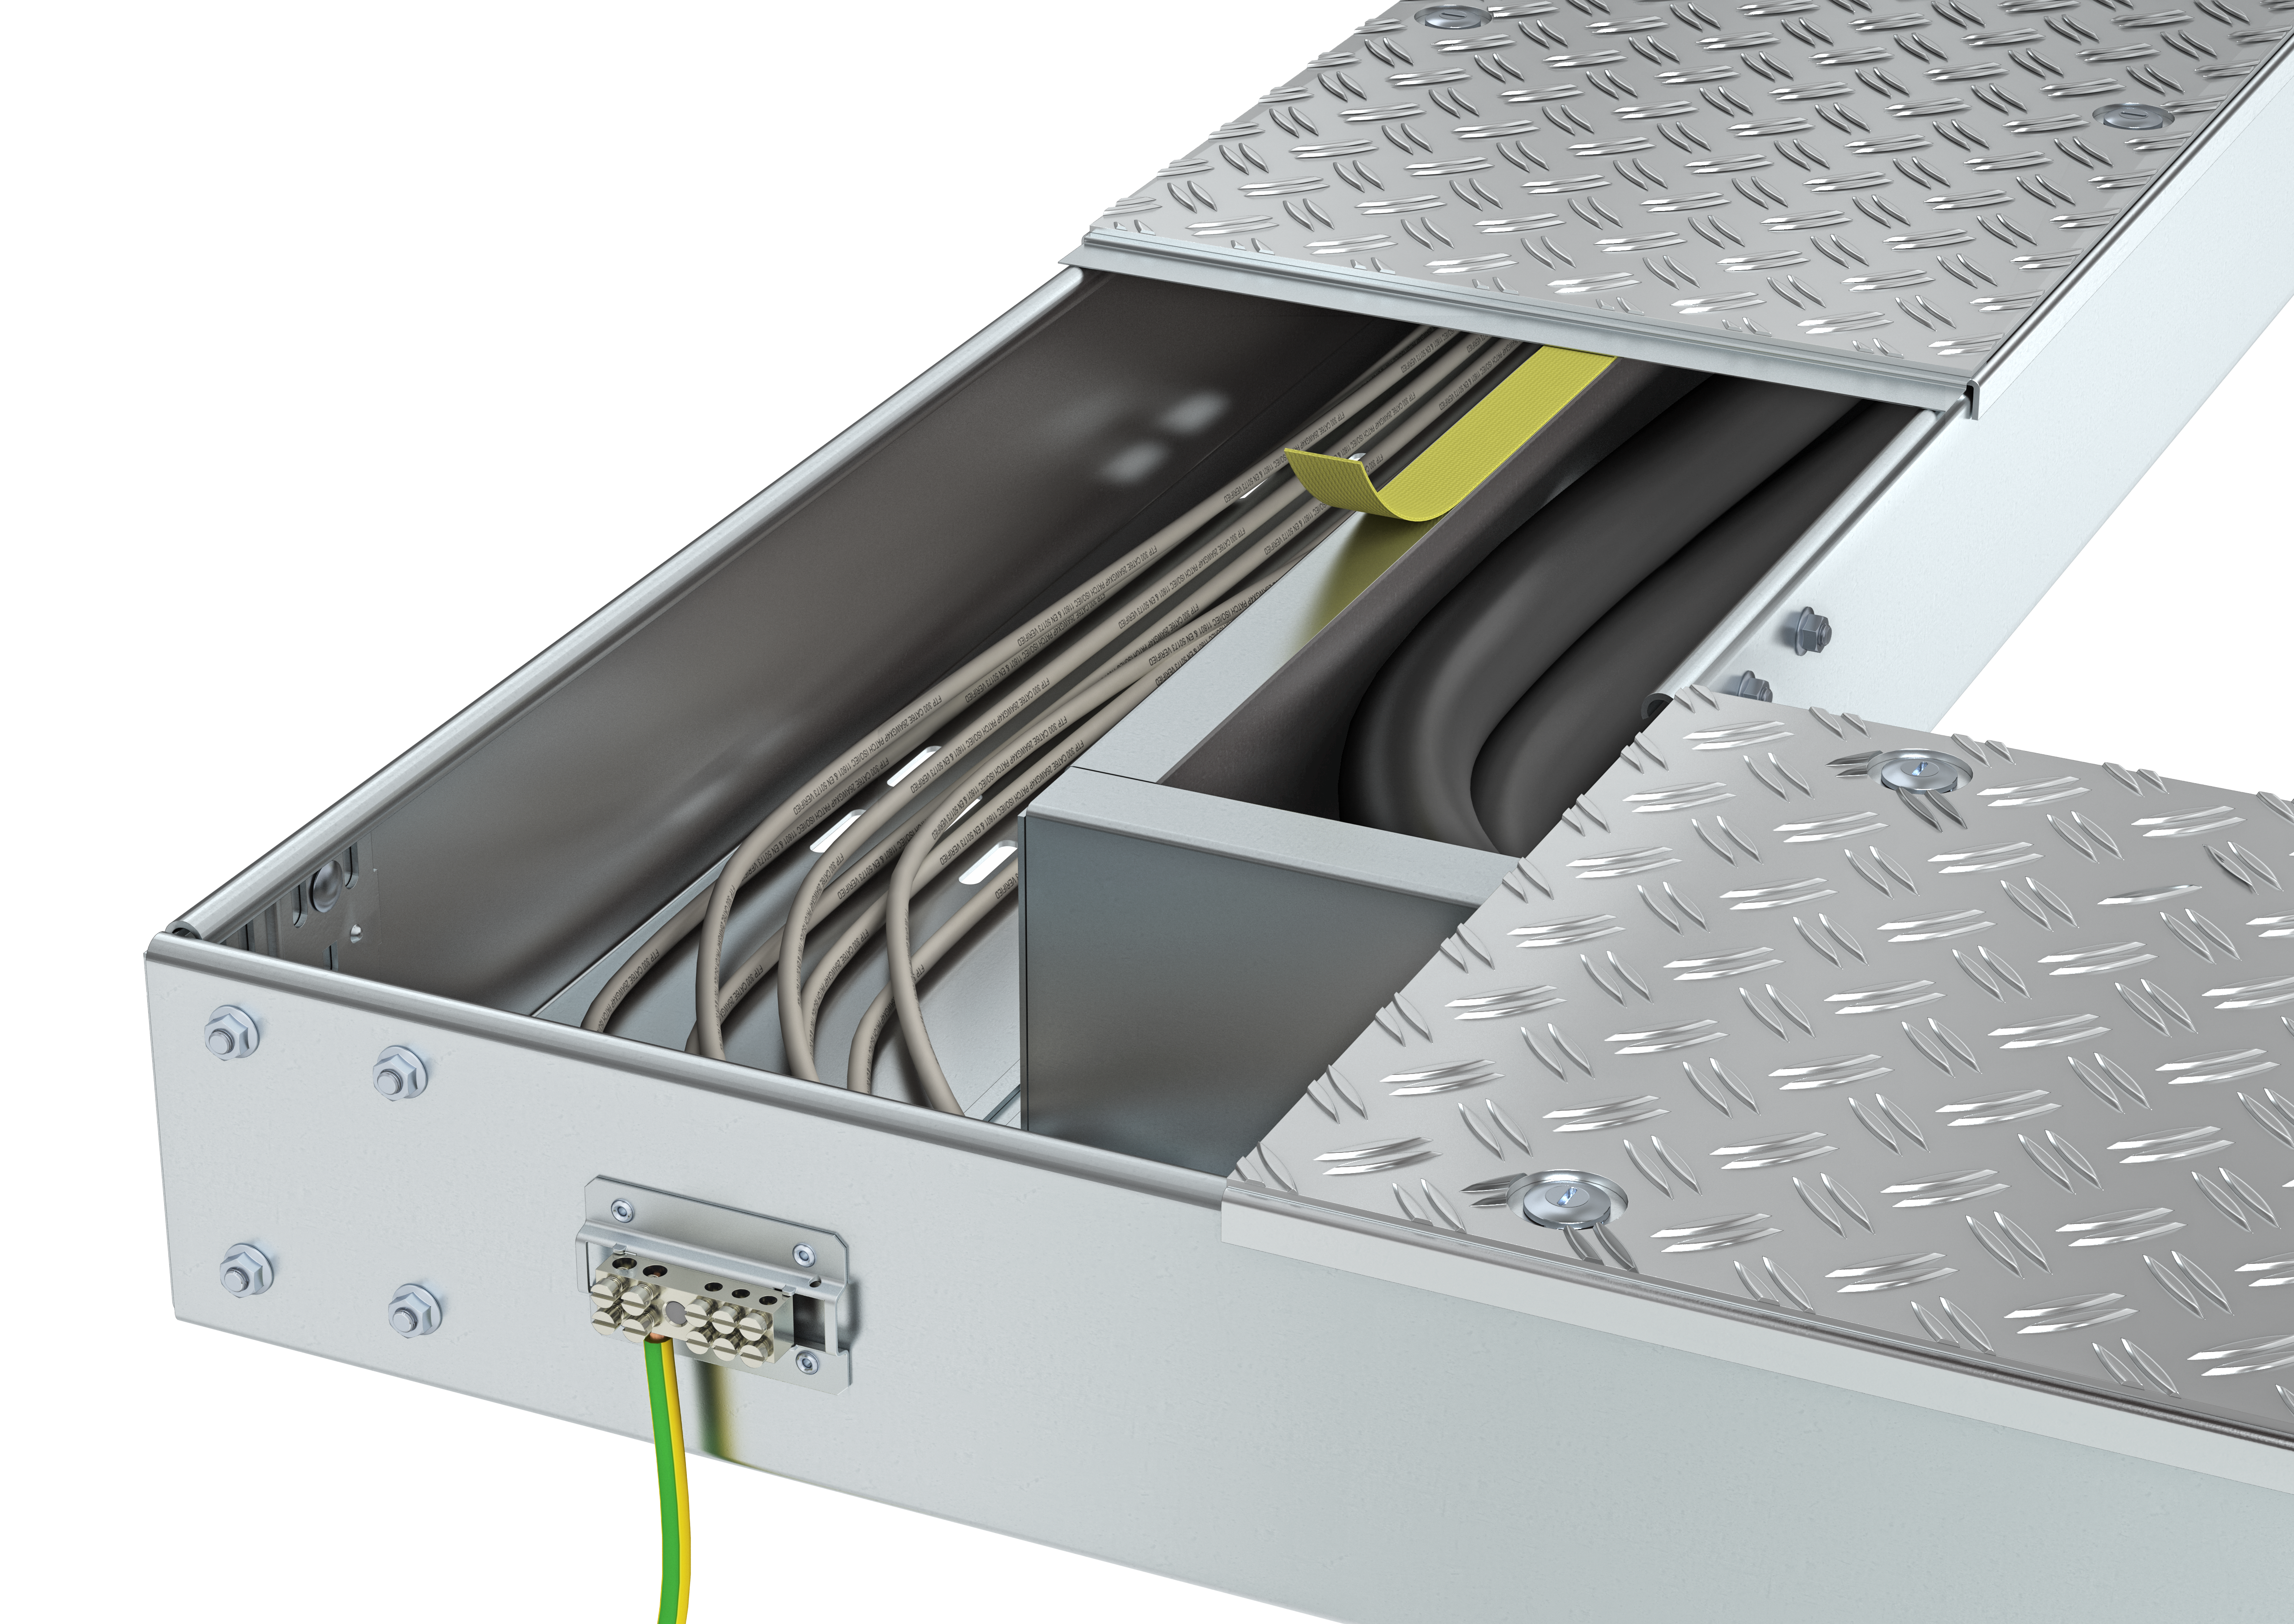 Cable Tray – Under Surface Mounted